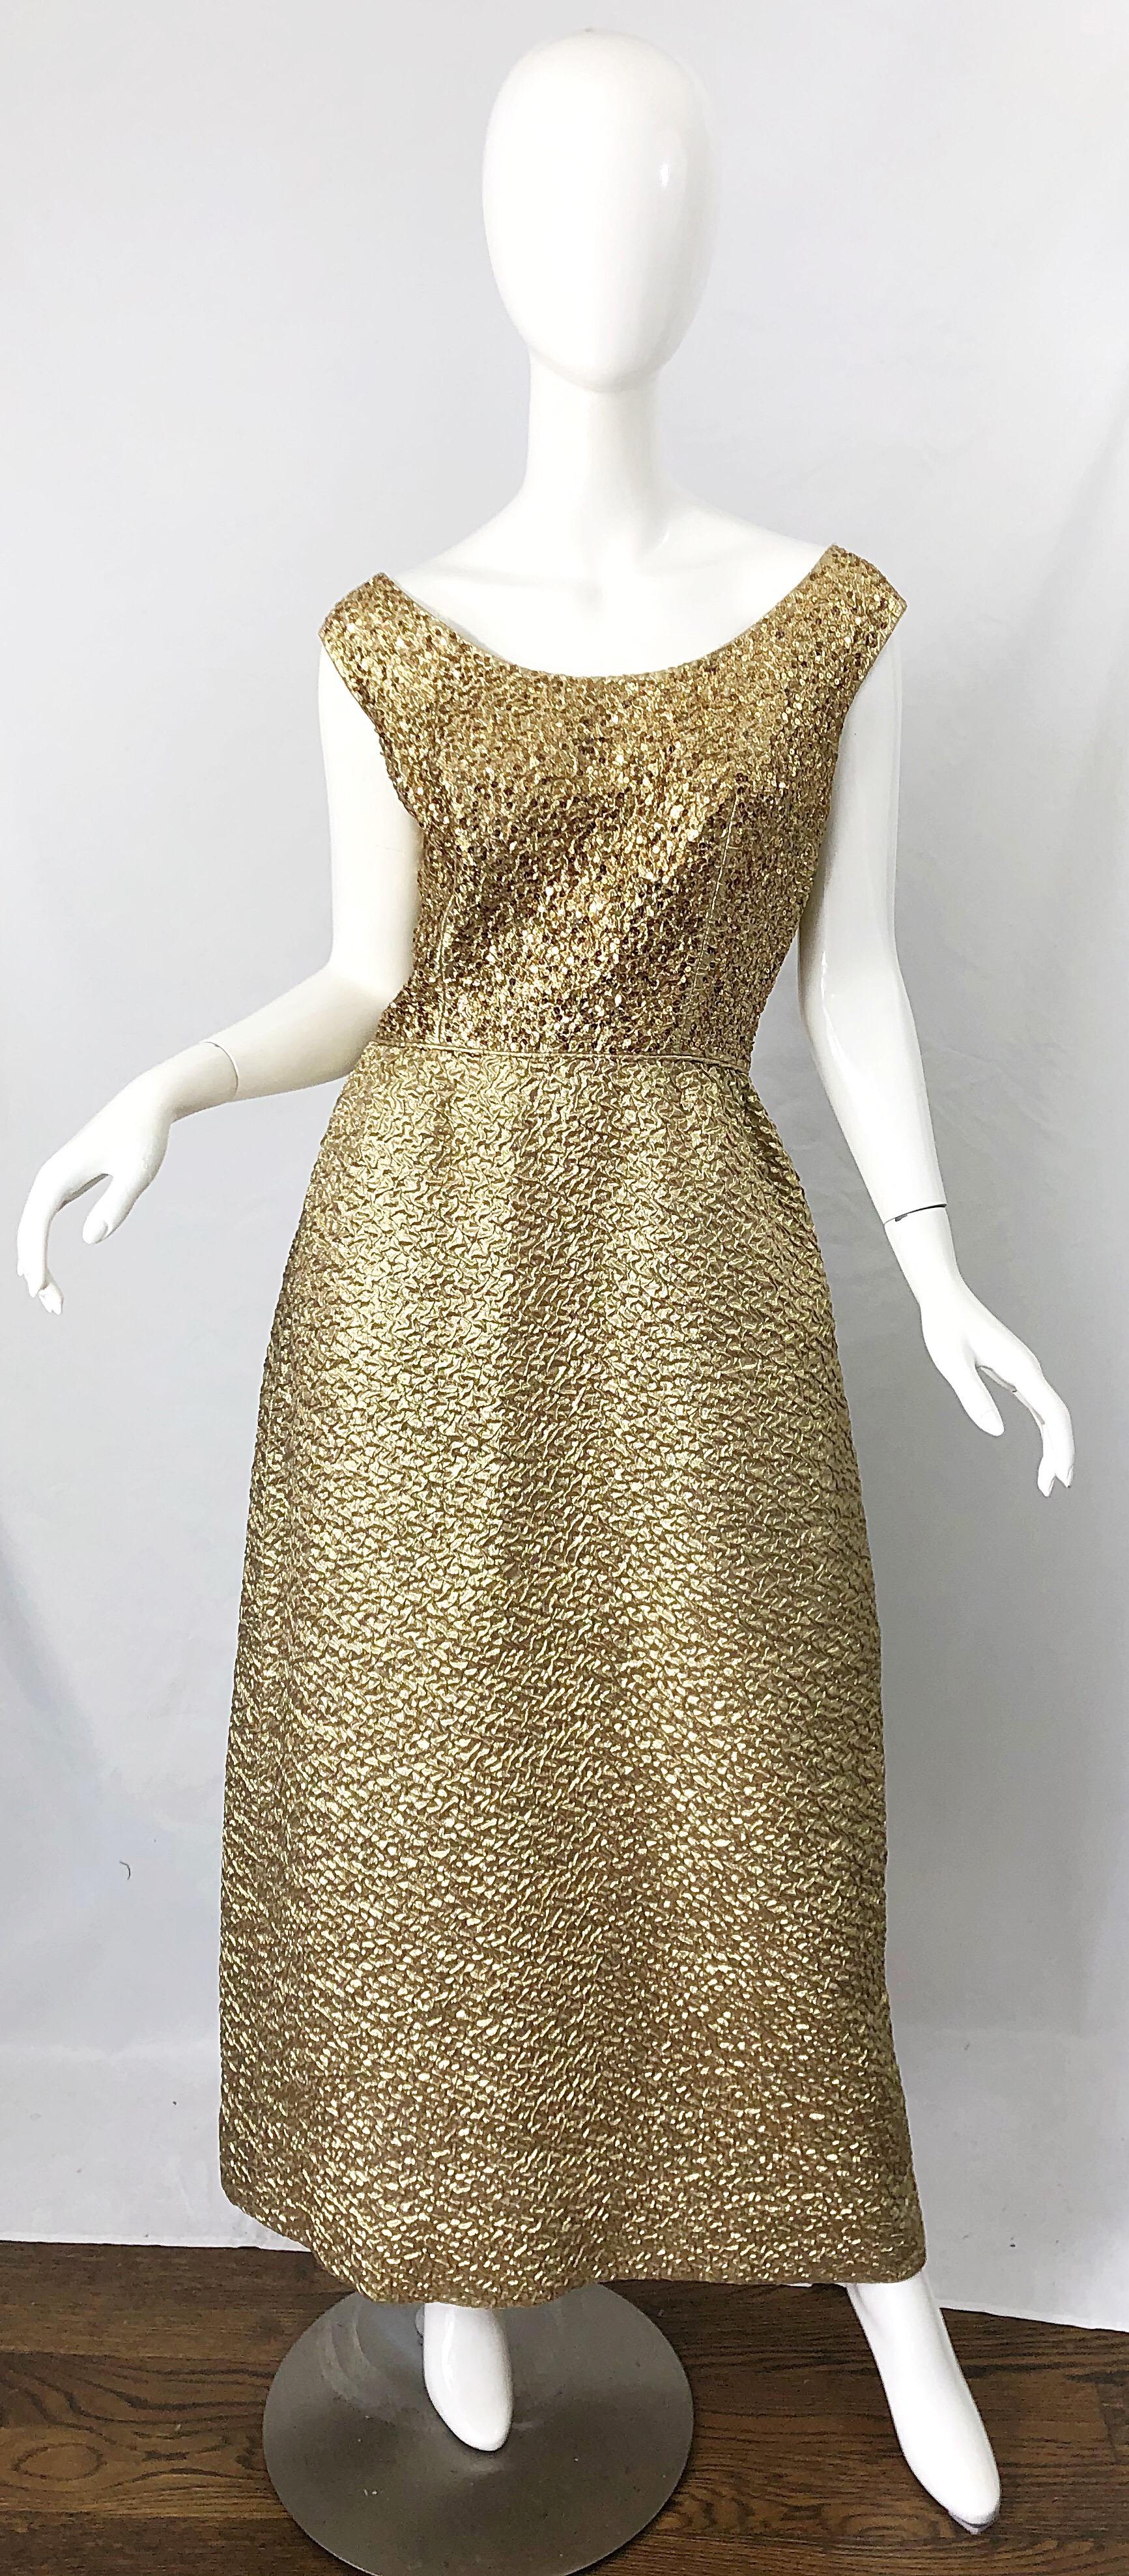 Stunning early 1960s NAT KAPLAN gold sequin and rhinestone encrusted sleeveless evening gown ! Thousands of hand-sewn star shaped gold sequins throughout the bodice, with golden rhinestones scattered throughout. Textured silk skirt. Hidden metal